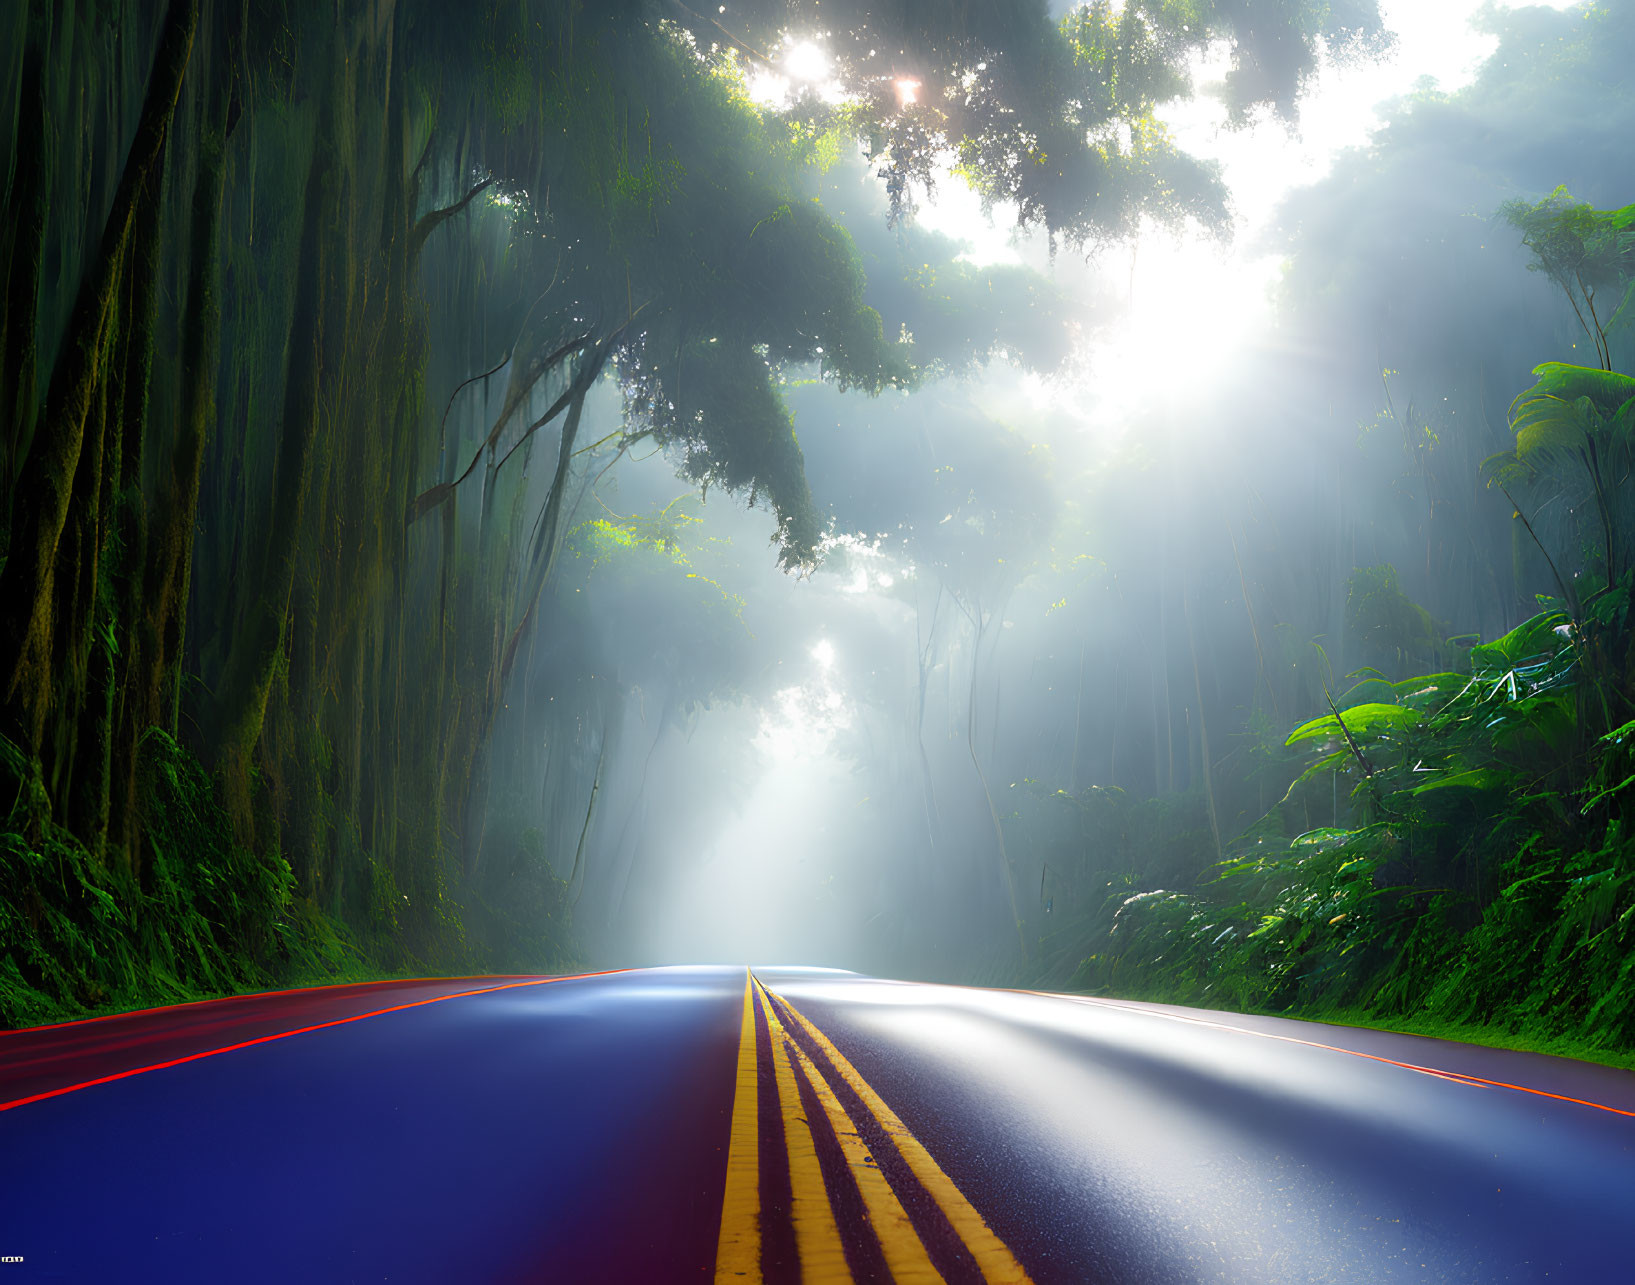 Sunlight through mist in lush green forest with vibrant road markings